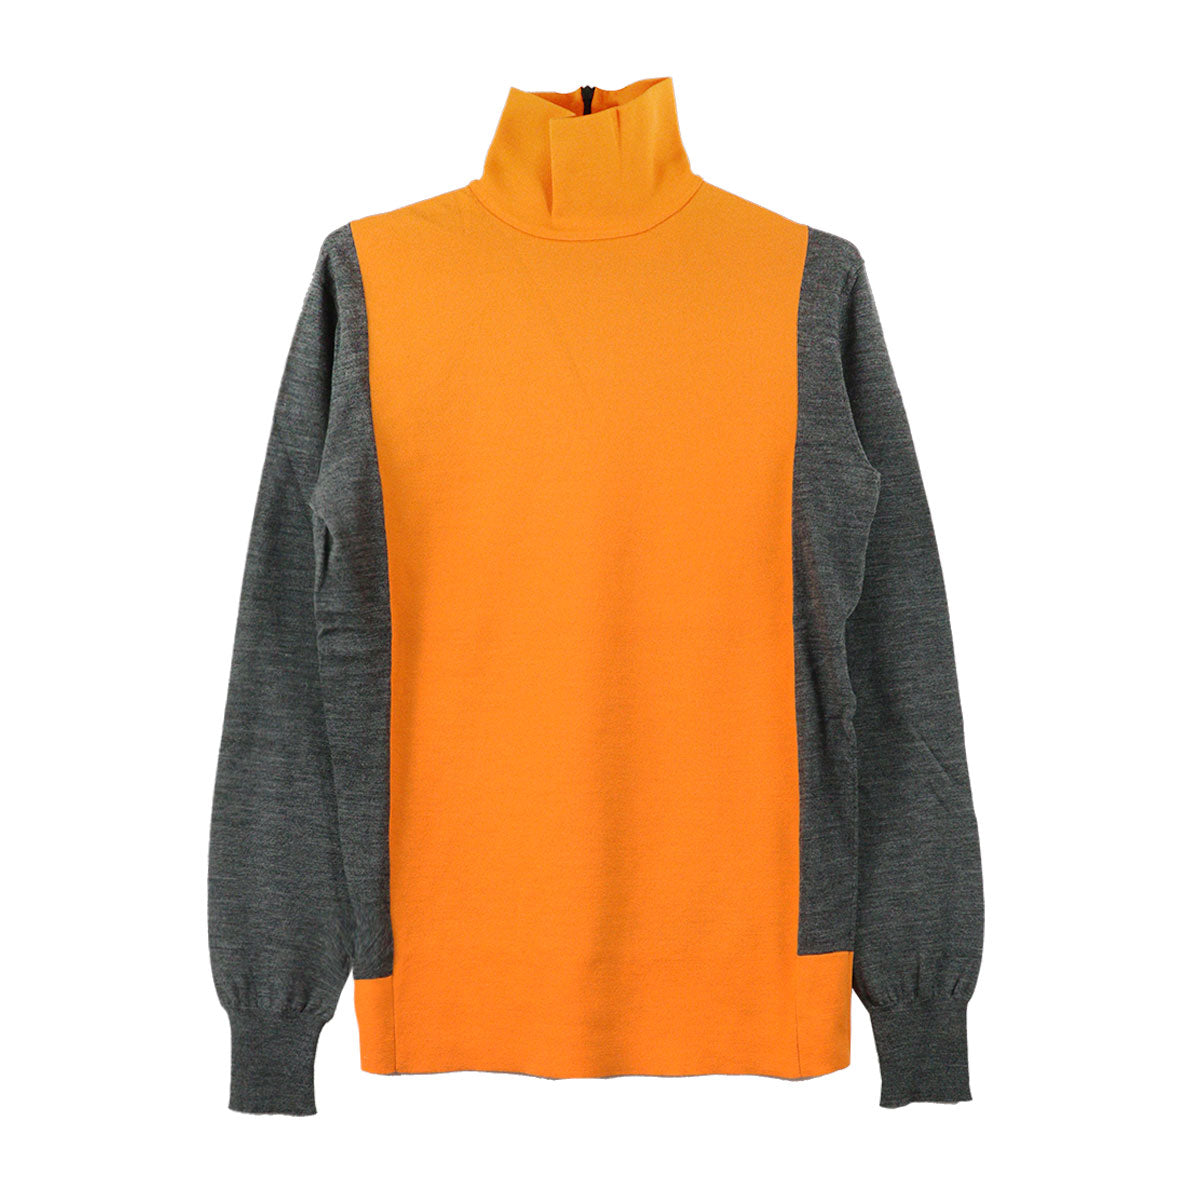 L/S BICOLOR TURTLE NECK - Why are you here?